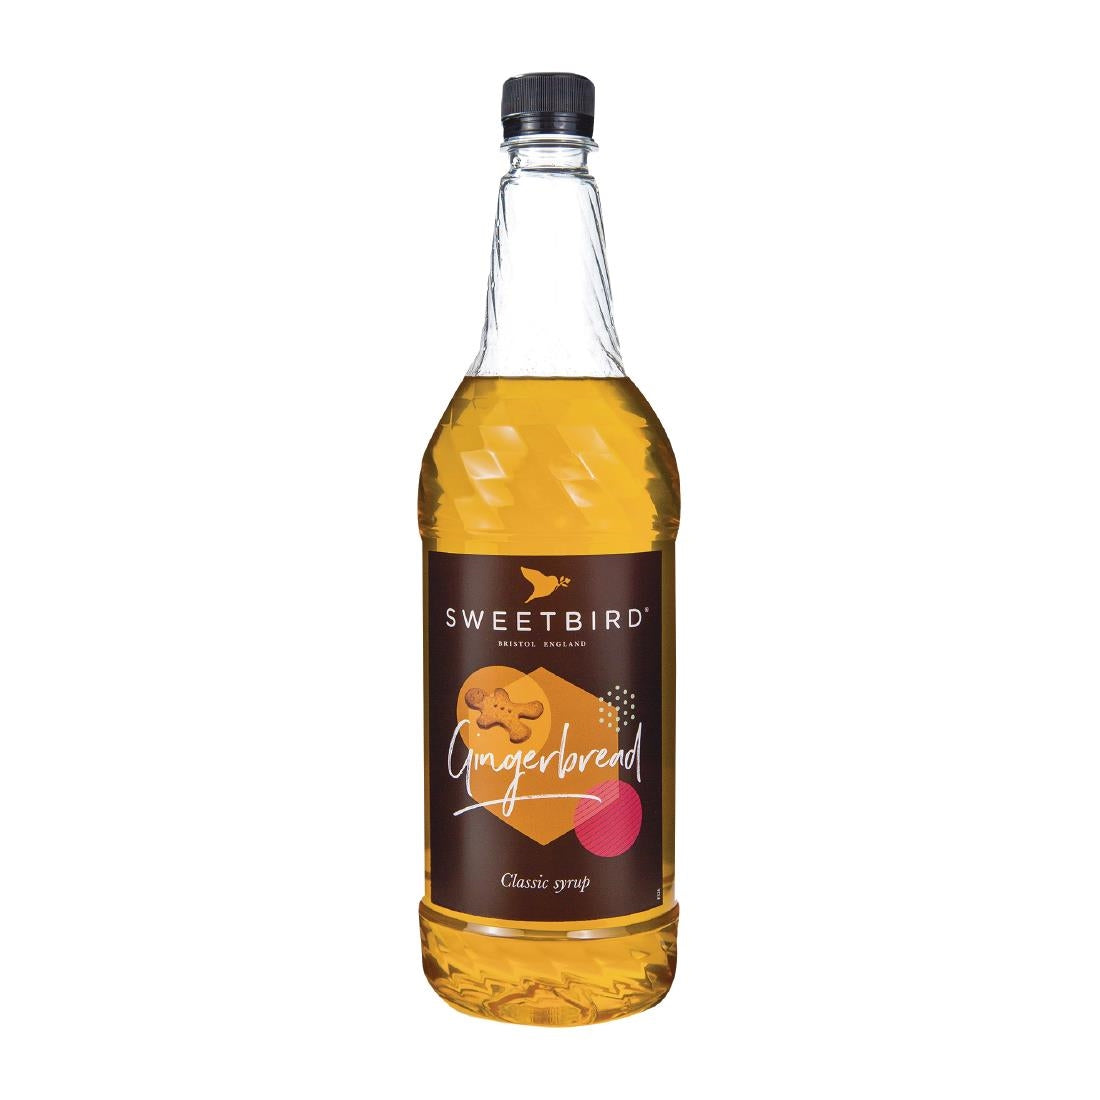 FS244 Sweetbird Gingerbread Syrup 1 Ltr JD Catering Equipment Solutions Ltd